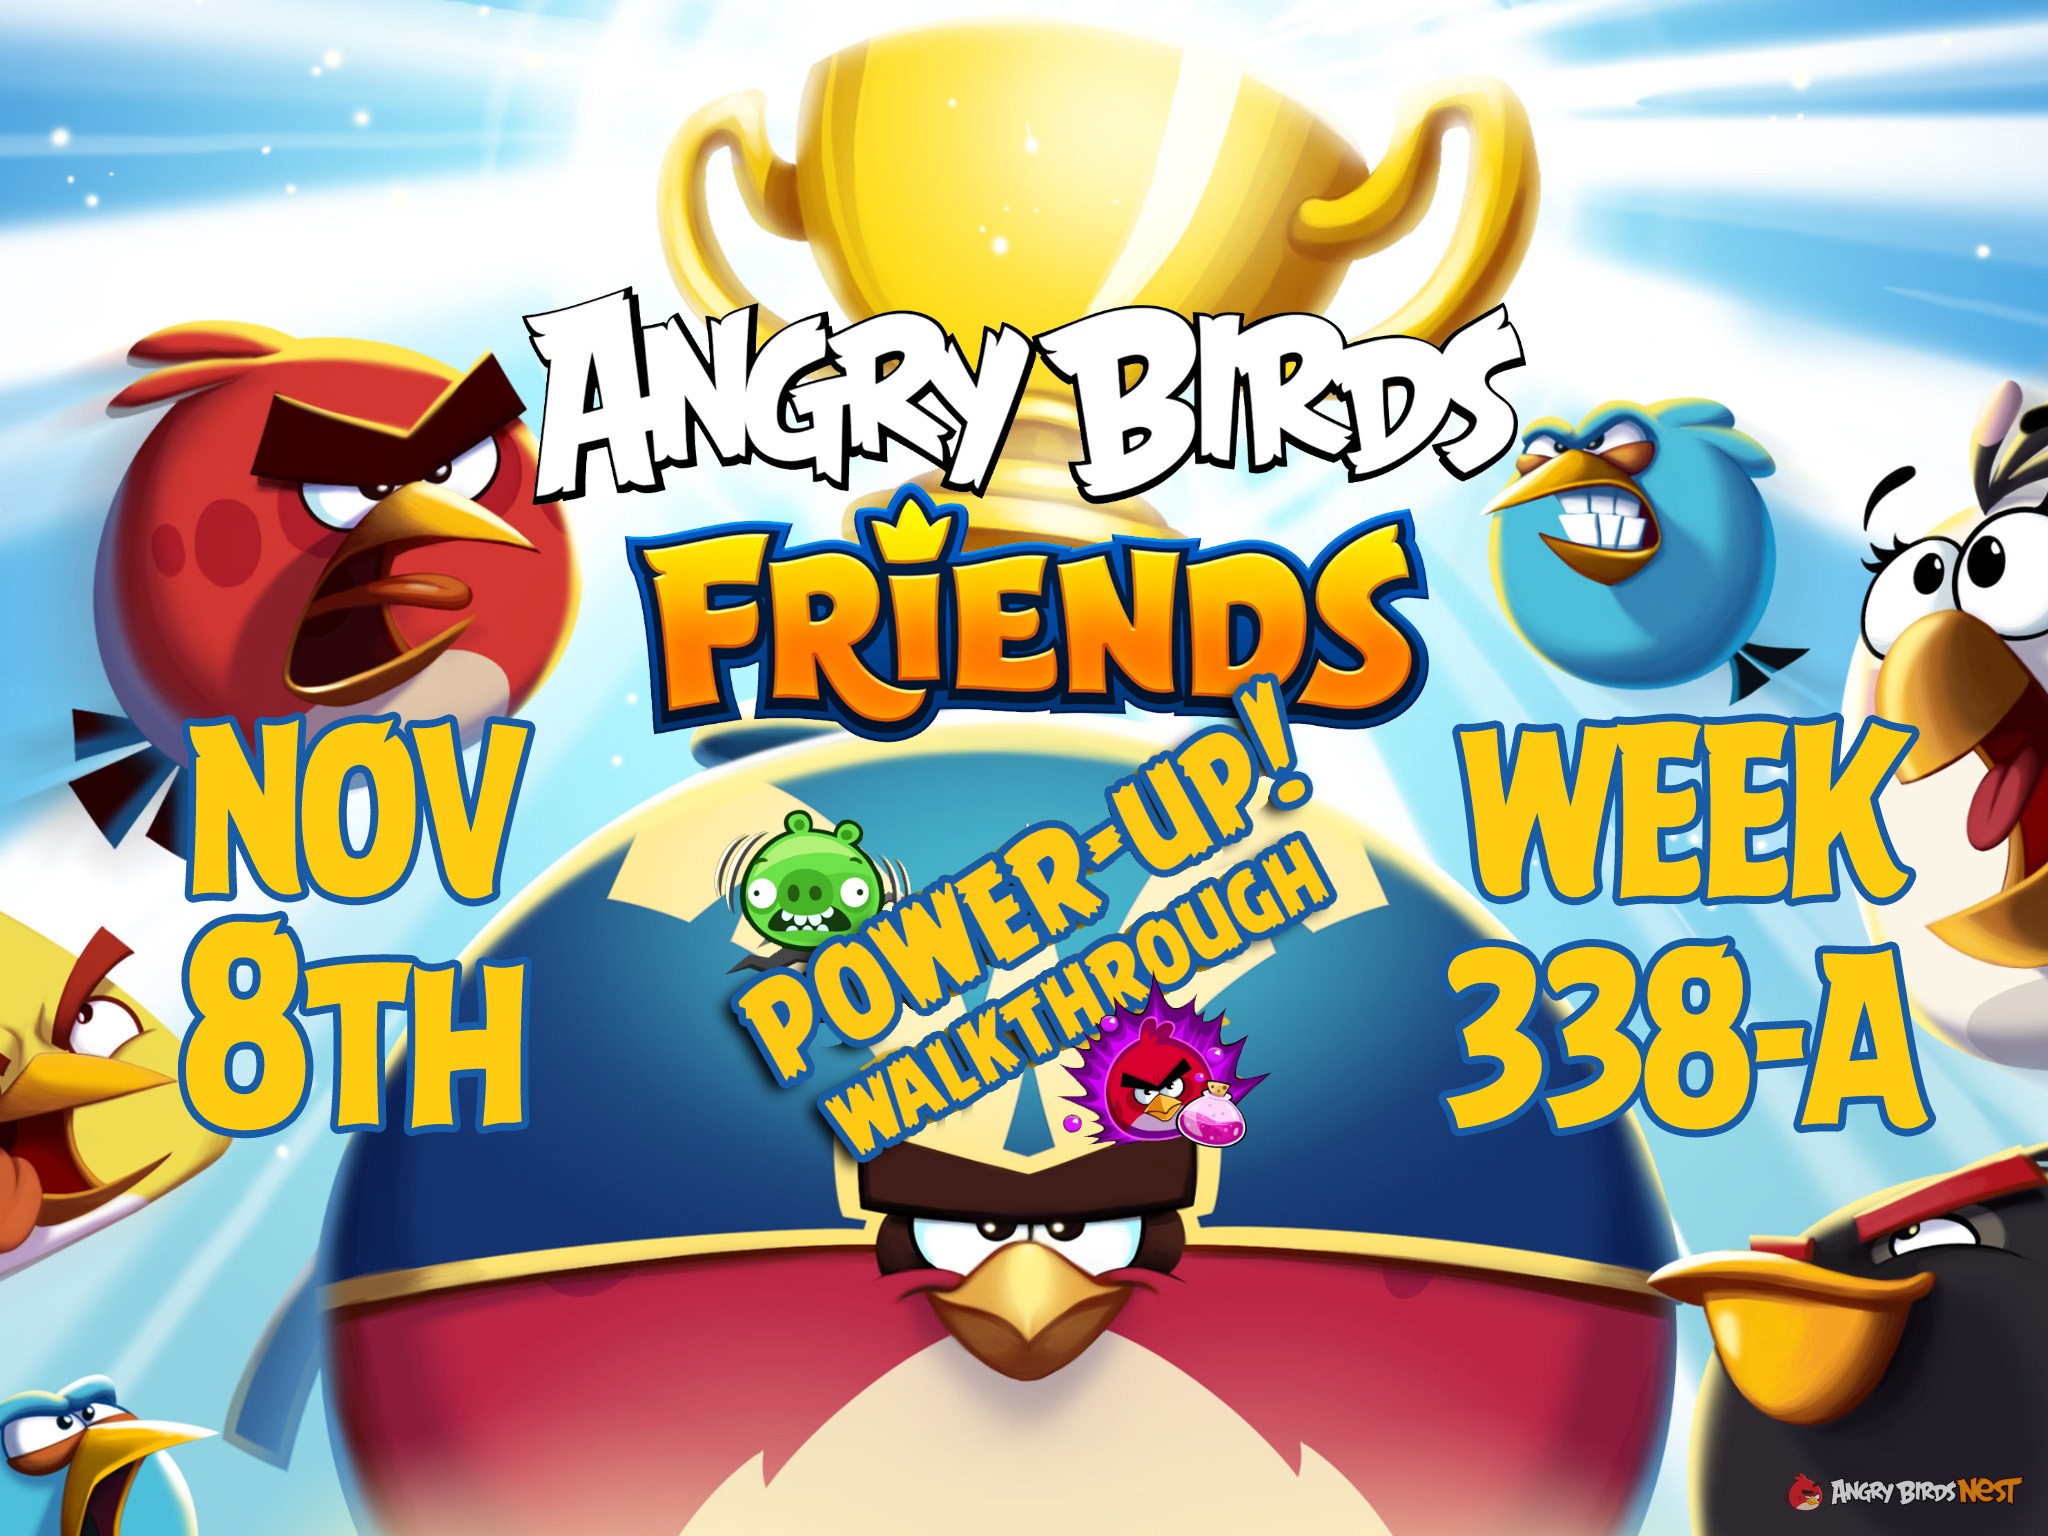 Angry-Birds-Friends-Tournament-Week-338-A-Feature-Image-PU